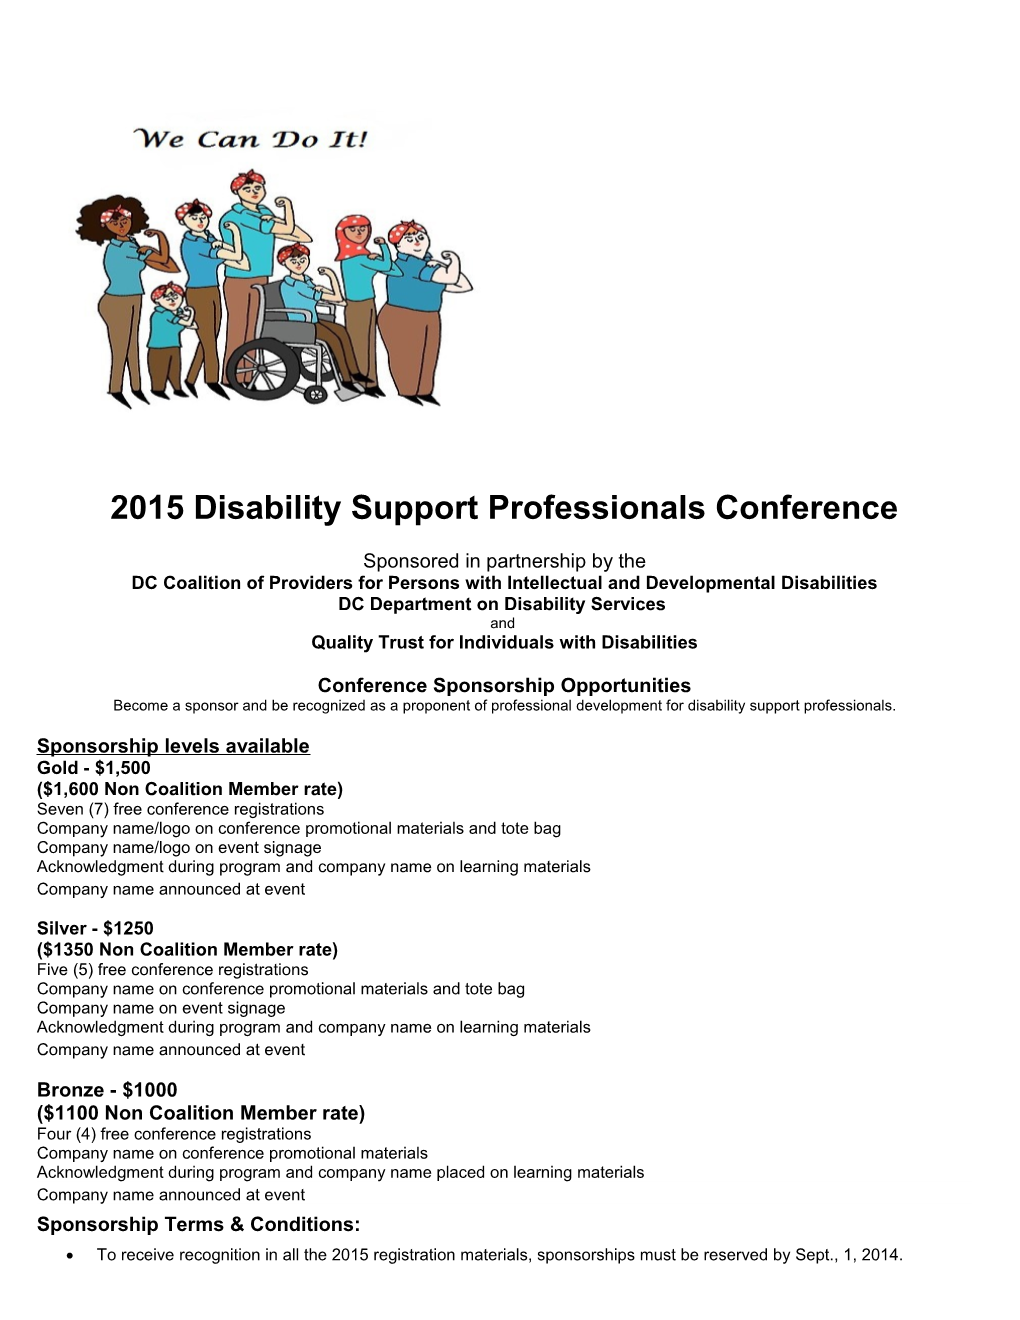 2015 Disability Support Professionals Conference